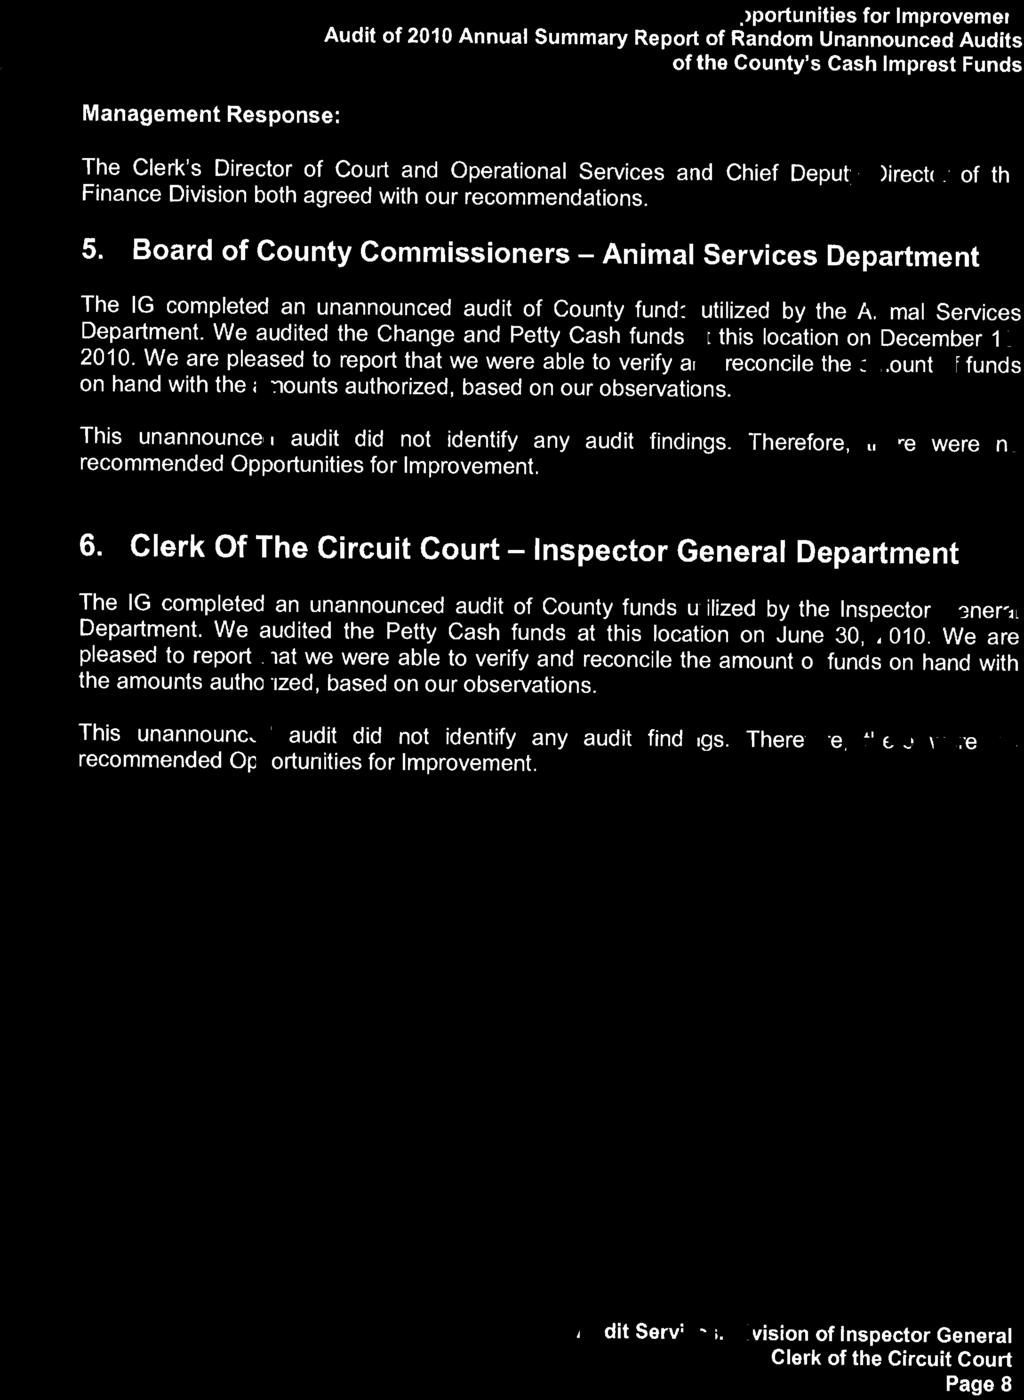 Board of County ComlTlissioners - Animal Services Department The IG completed an unannounced audit of County funds utilized by the Animal Services Department.